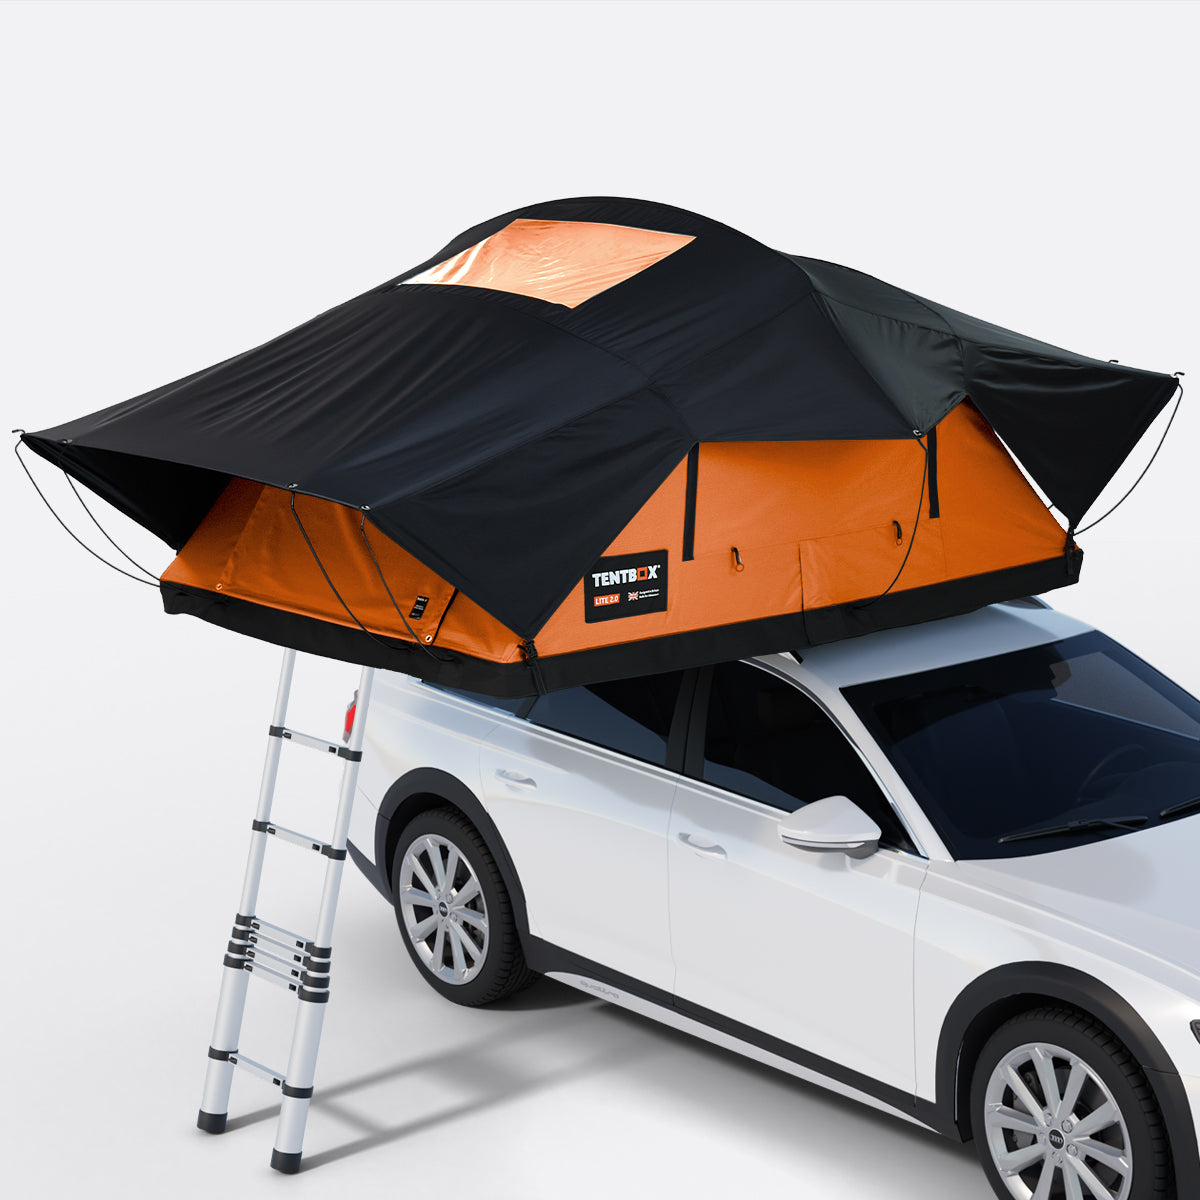 TentBox Lite XL Rooftop Tent - 4 Person